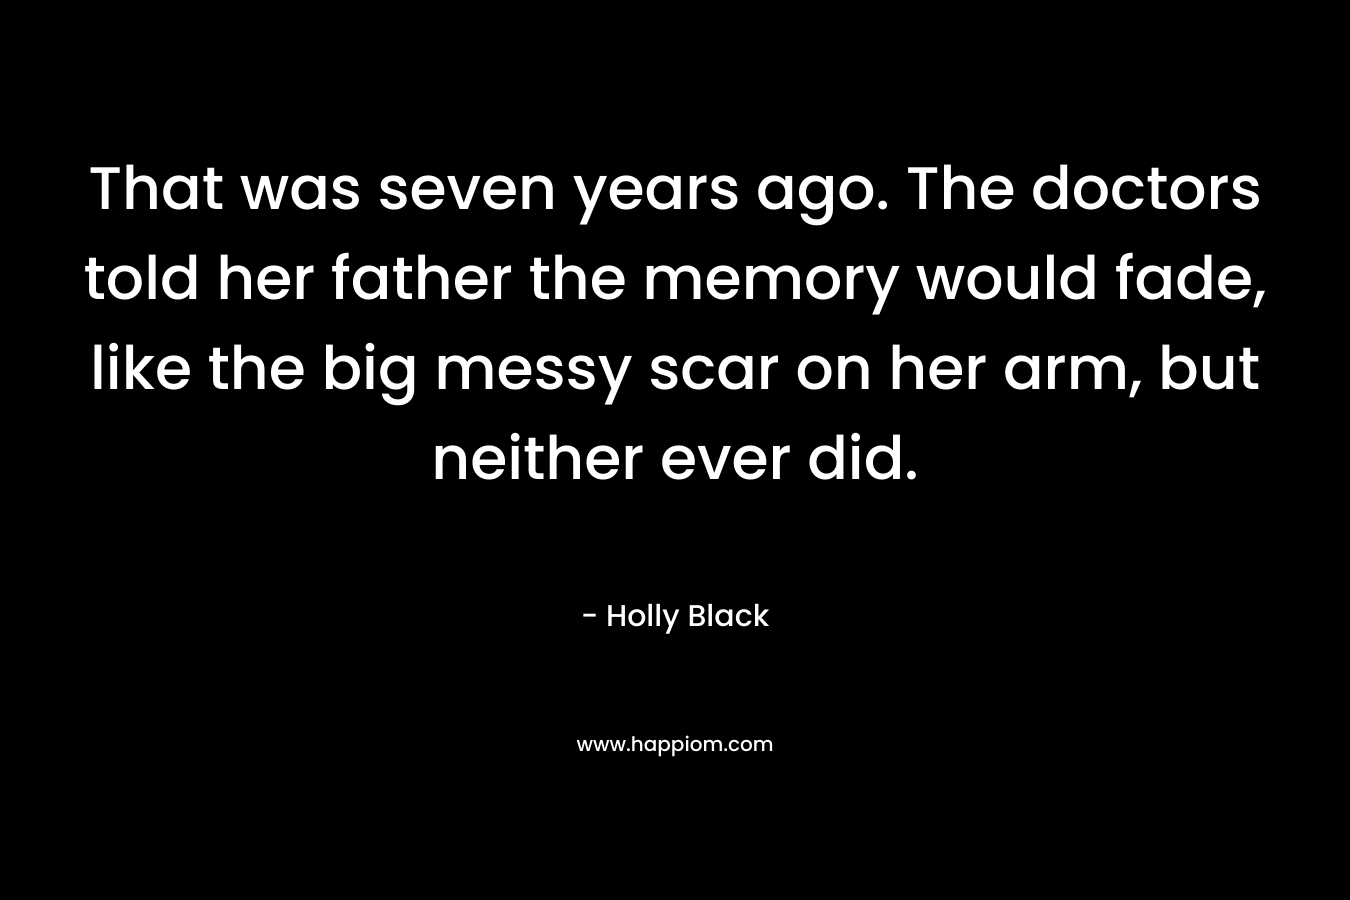 That was seven years ago. The doctors told her father the memory would fade, like the big messy scar on her arm, but neither ever did. – Holly Black